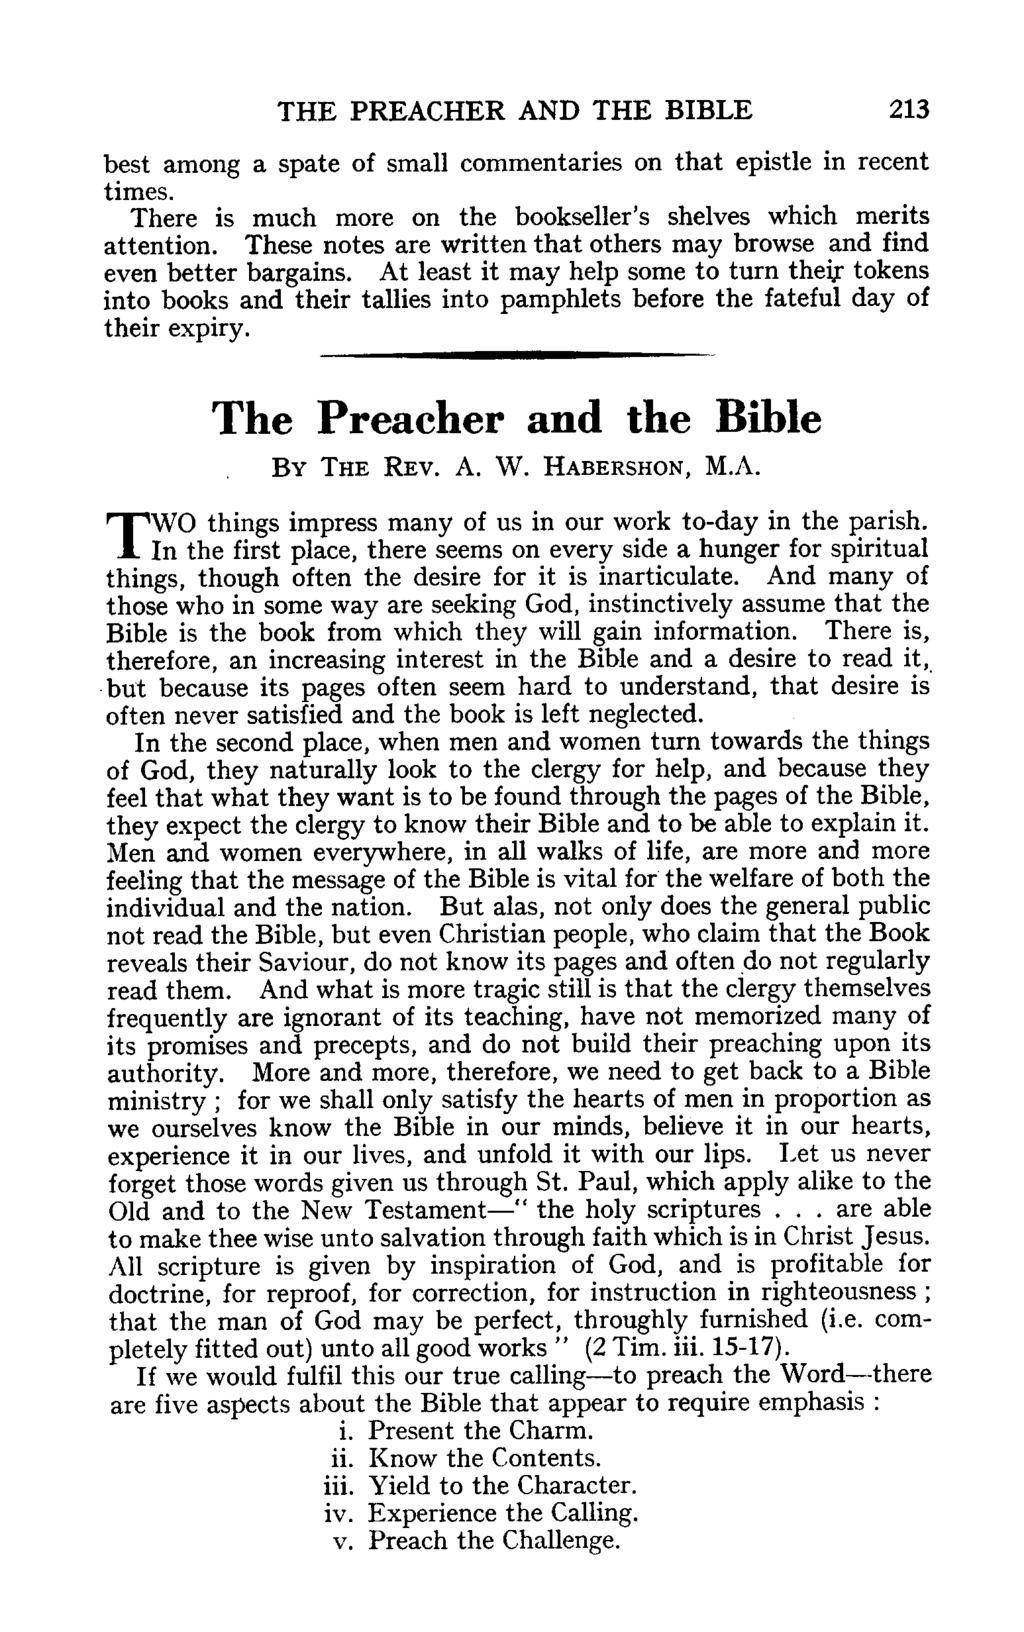 THE PREACHER AND THE BIBLE 213 best among a spate of small commentaries on that epistle in recent times. There is much more on the bookseller's shelves which merits attention.